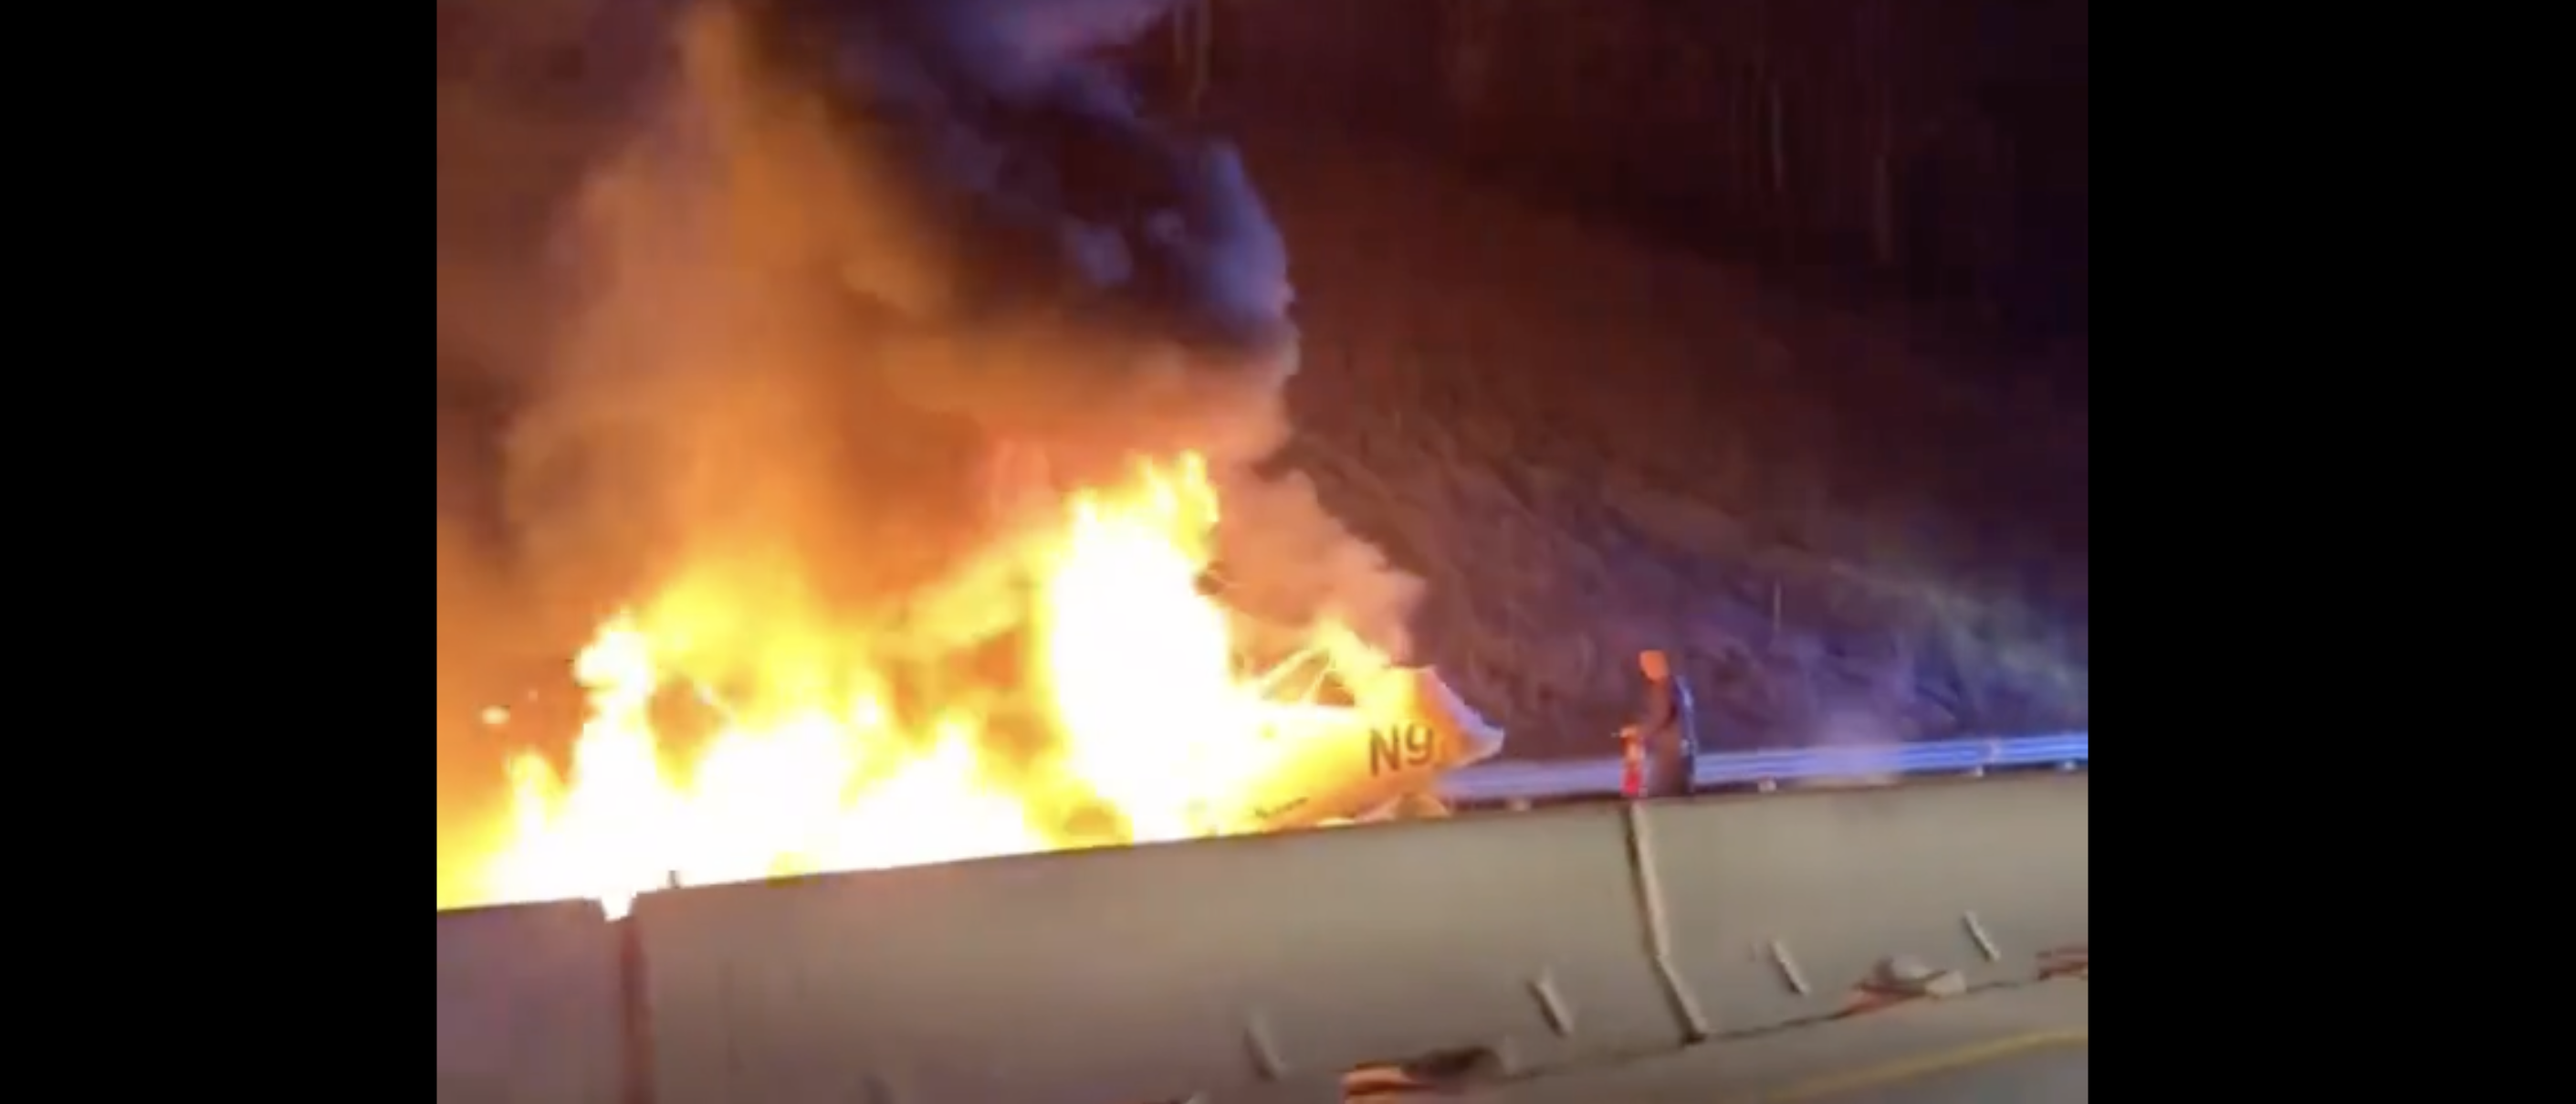 Airplane Reportedly Crashes On Highway. Video Shows Fiery Aftermath